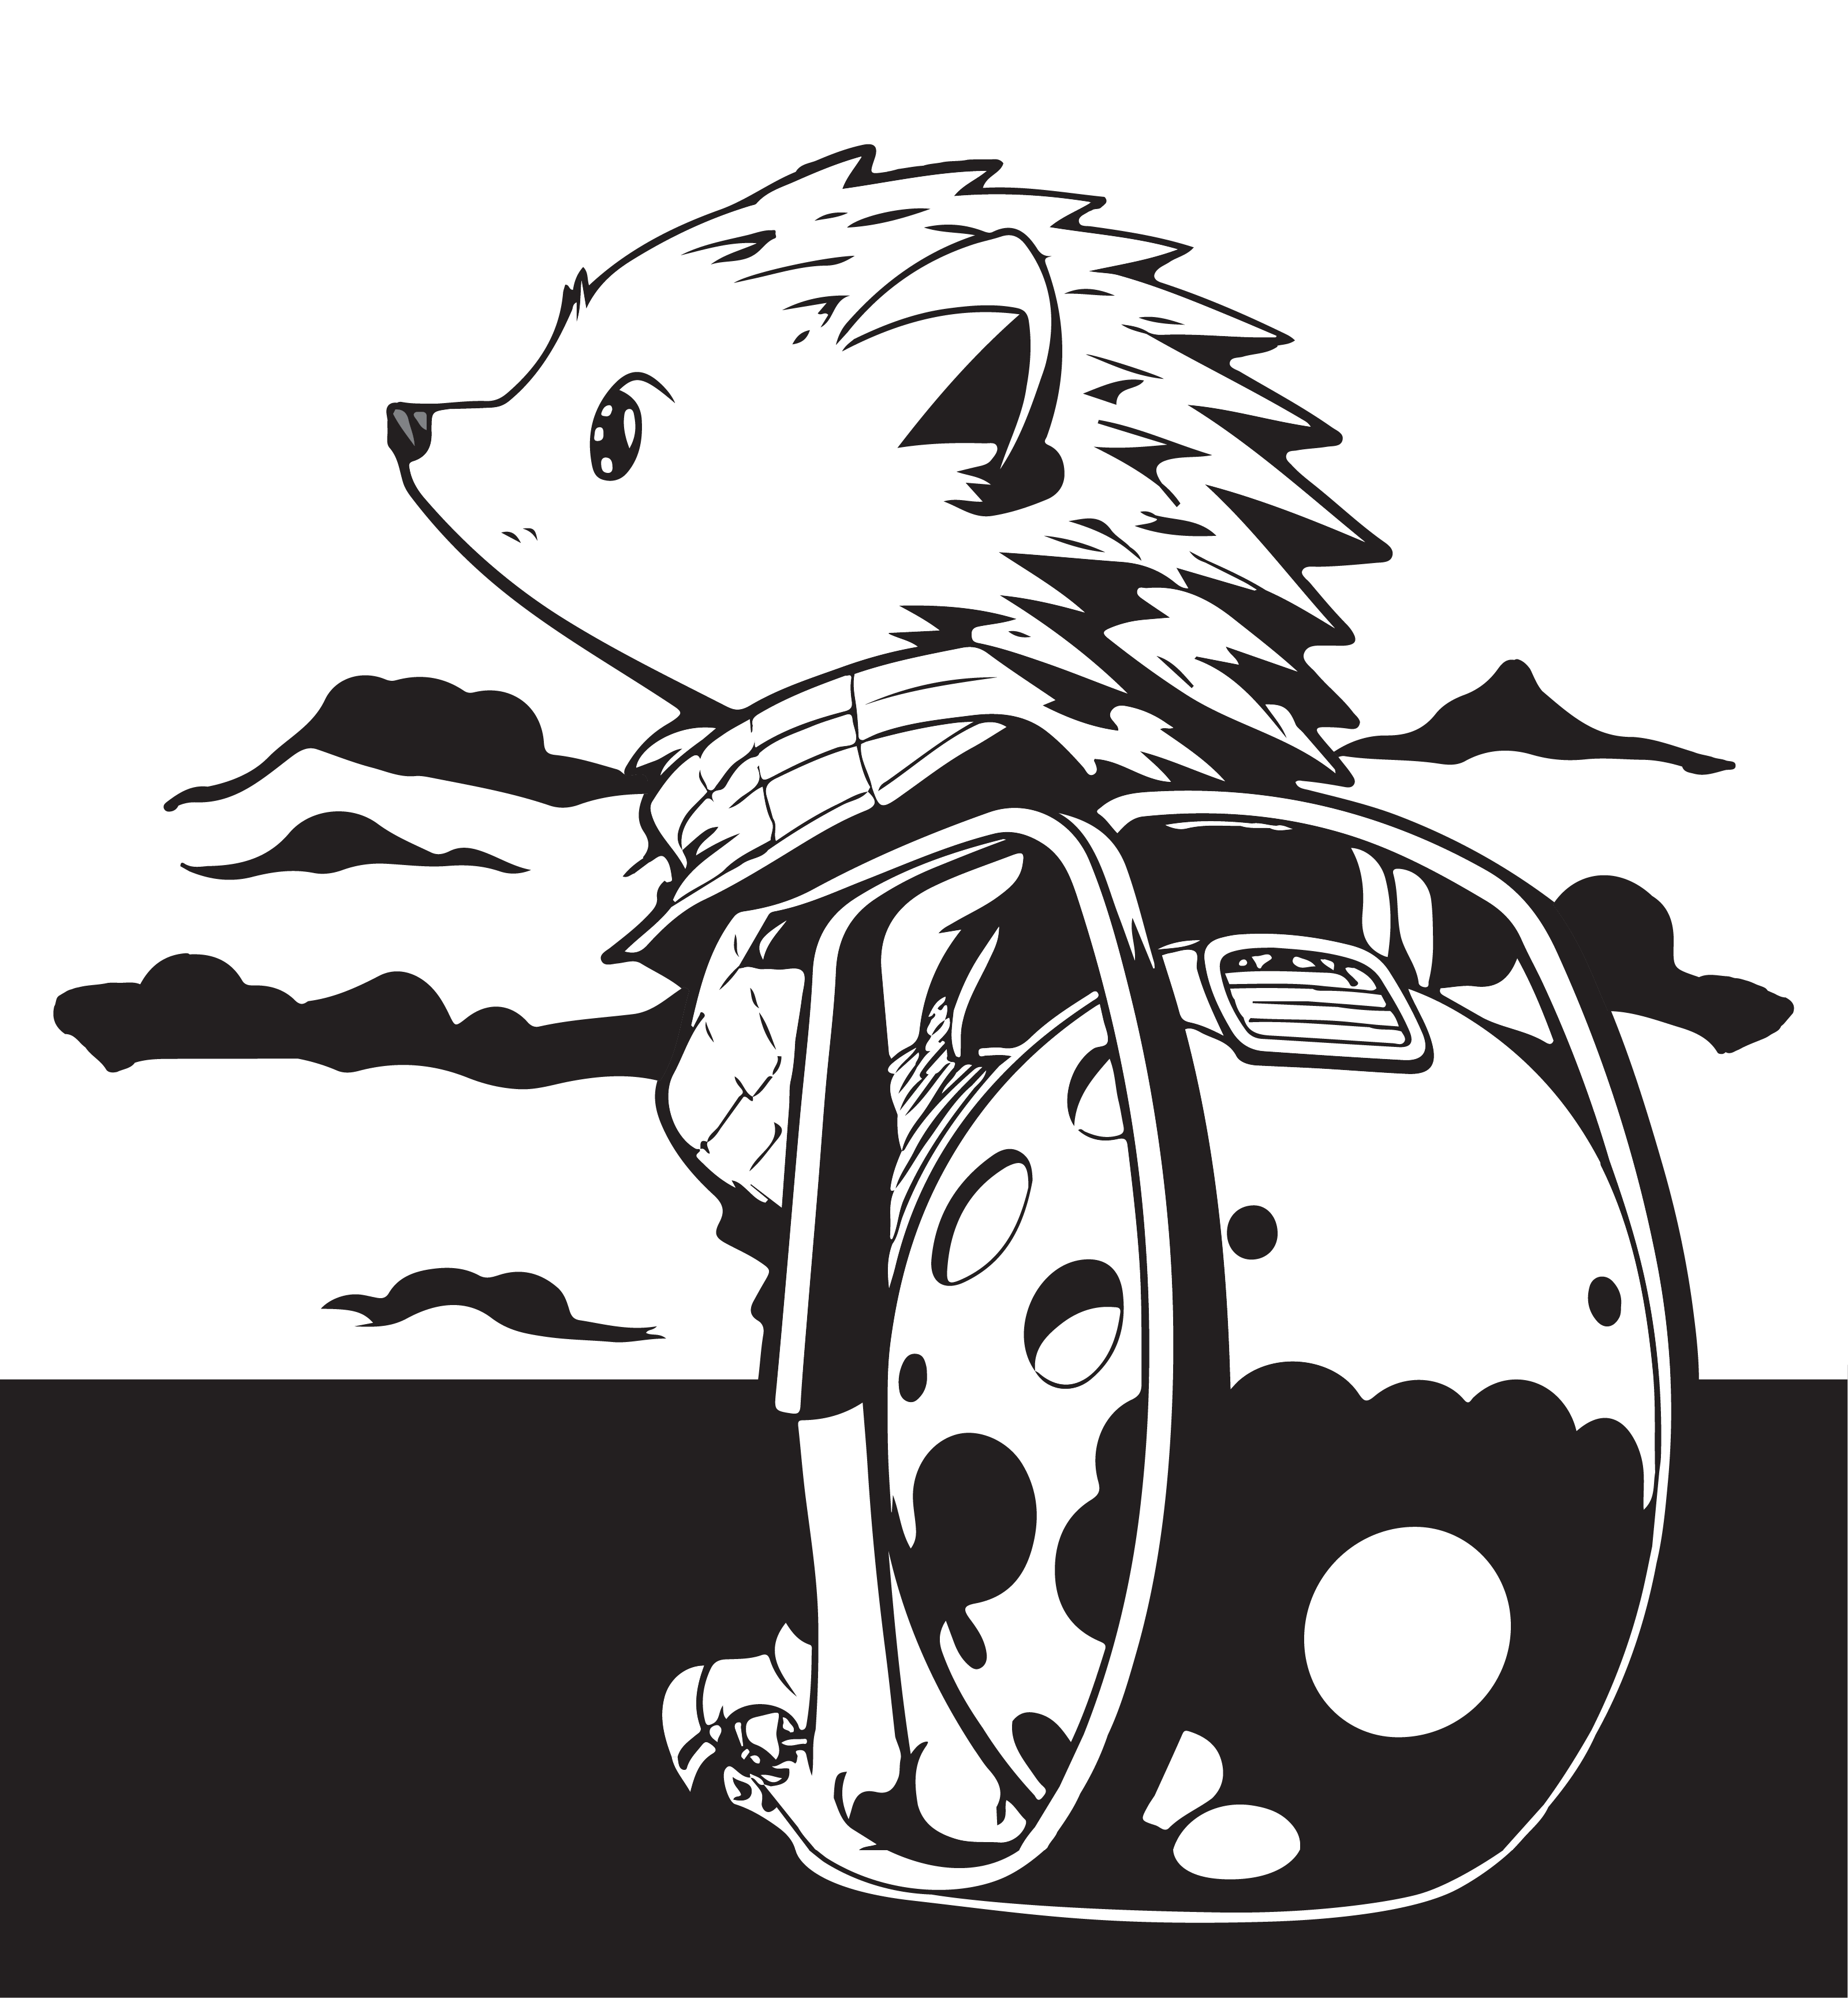 A monochrome illustration of a futuristic hedgehog character turned to the side, gazing into the distance.  Adorned in a windbreaker, carrying a robotic golf bag, set against a stylized horizon and clouds. Both the hedgehog and the robotic golf bag are depicted in a black and white illustration, with bold outlines and shading that give depth and definition to the design.